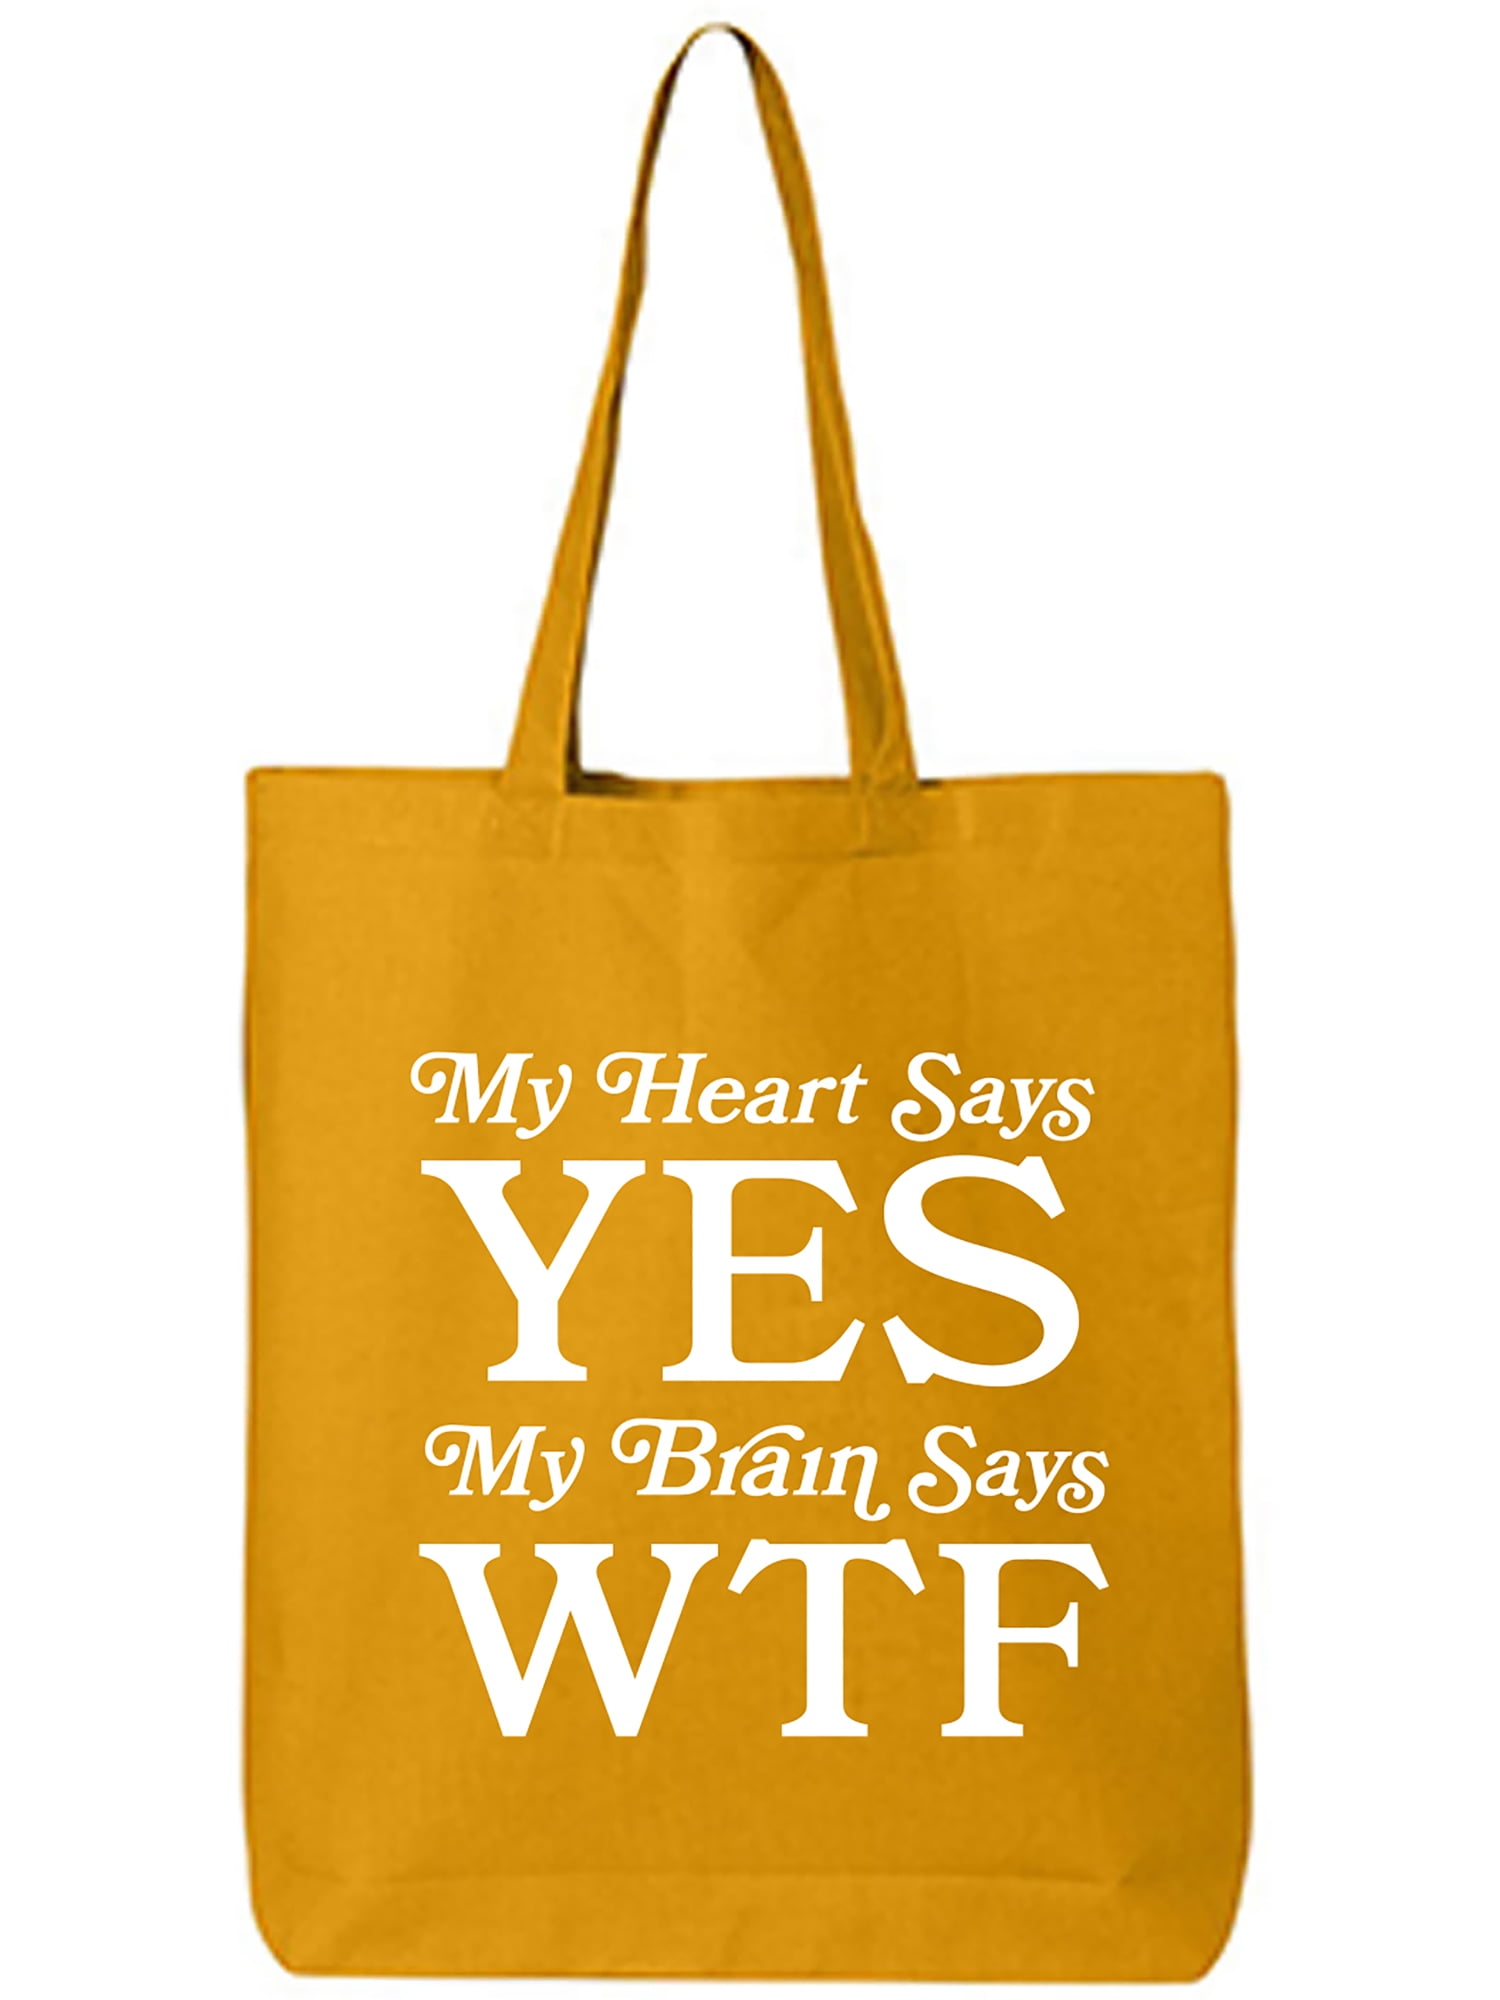 My Heart Says Yes..Brain Says WTF Cotton Canvas Tote Bag - Walmart.com